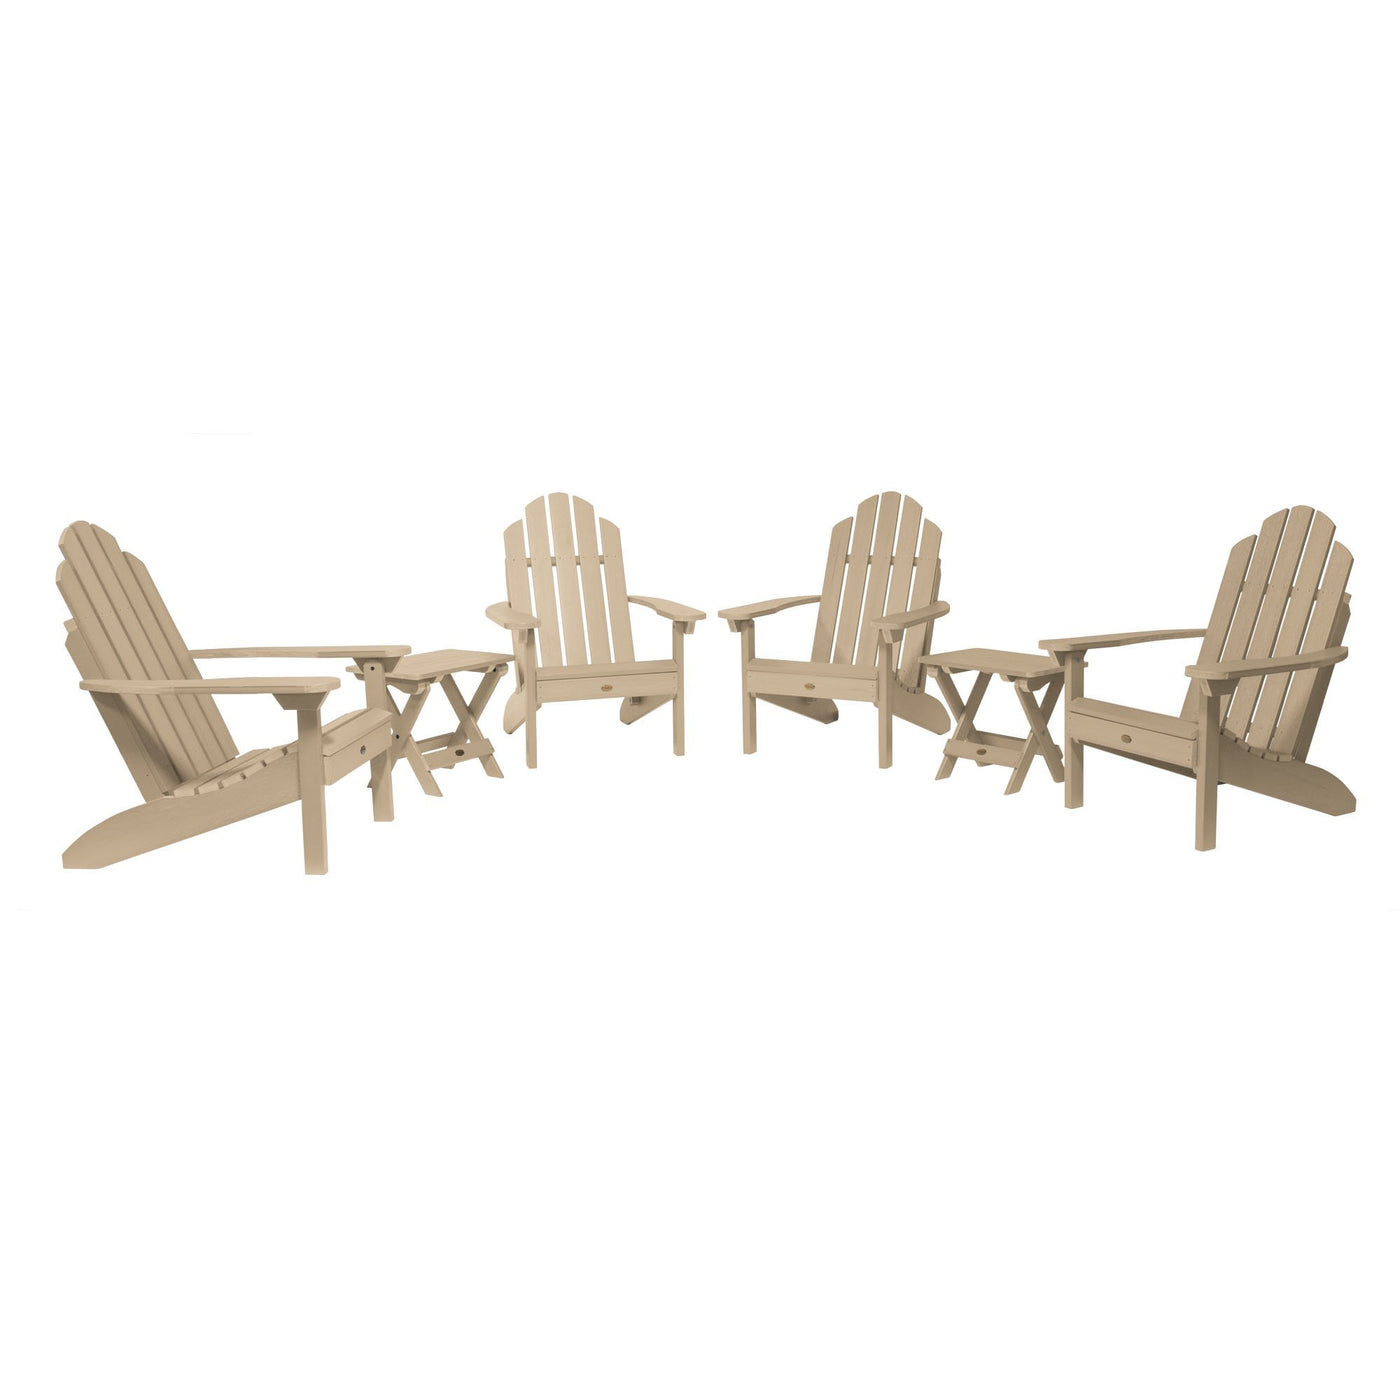 4 Classic Westport Adirondack Chairs with 2 Folding Side Tables Highwood USA Tuscan Taupe 